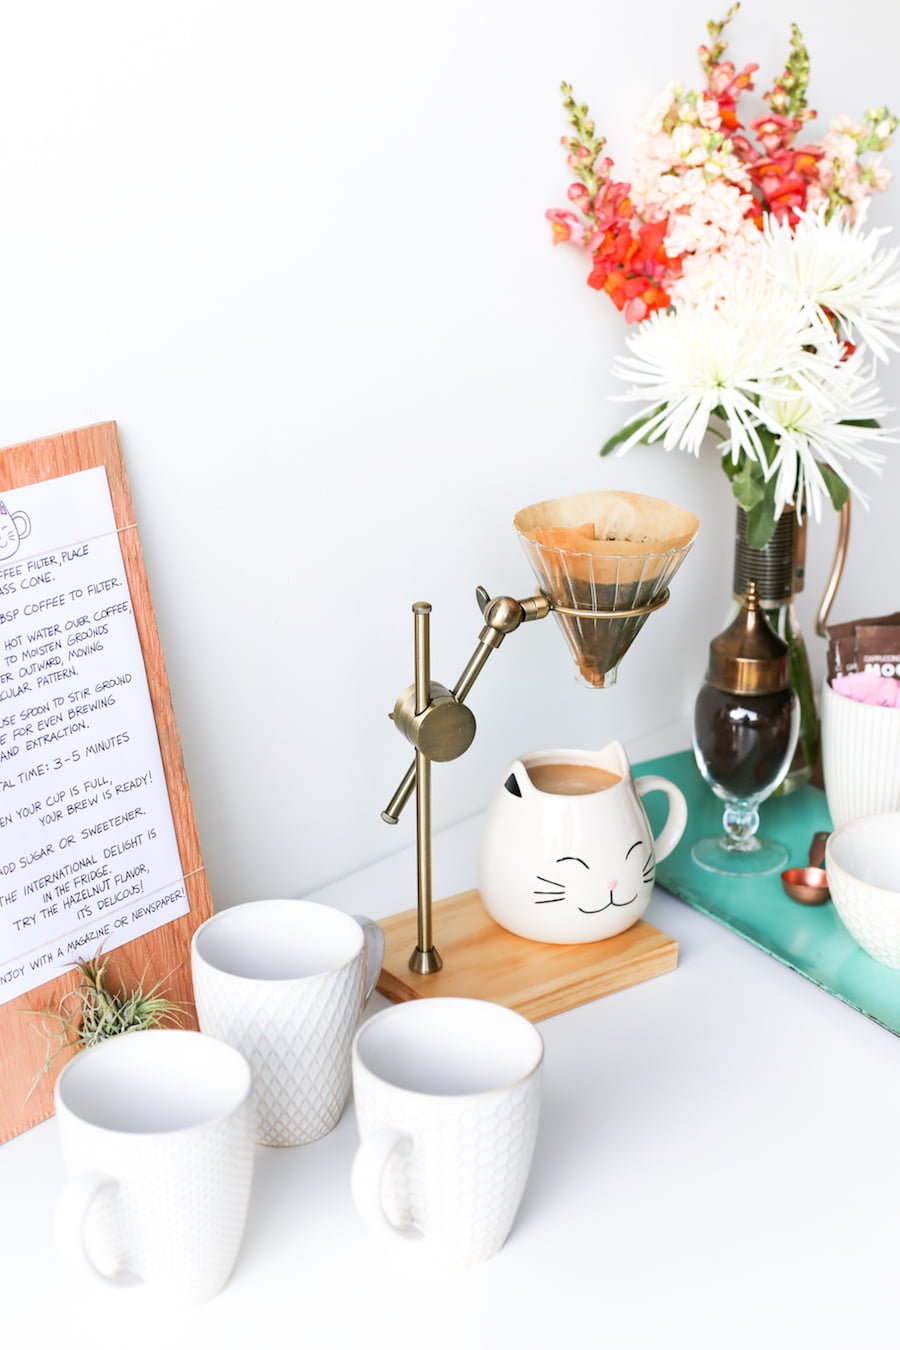 Set up a coffee station for your visiting friends and family so they feel right at home! // saltycanary.com